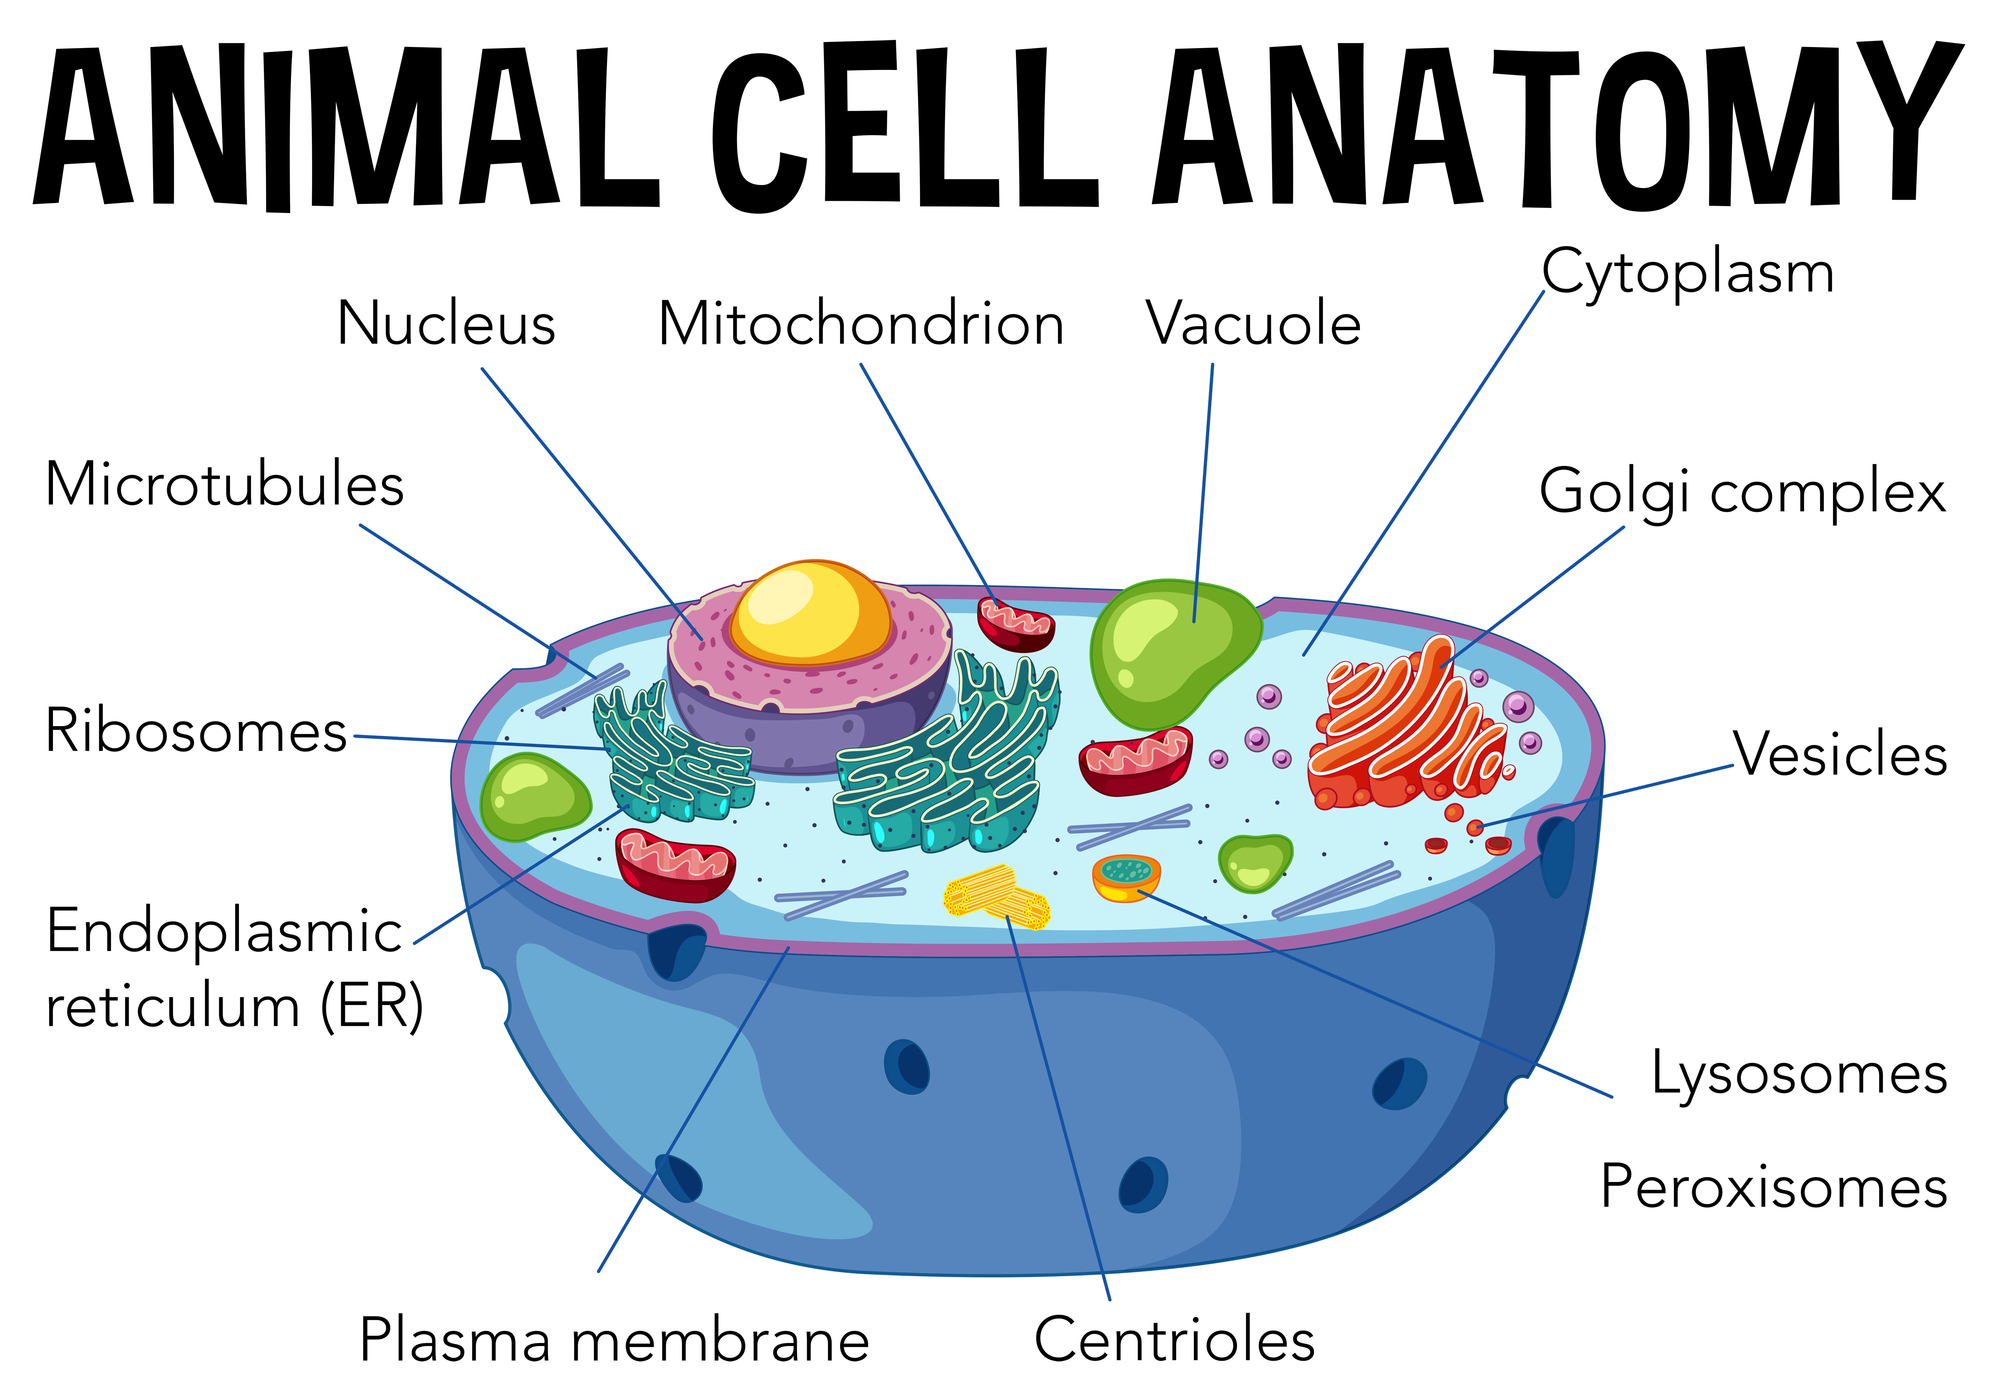 Cell Anatomy icon